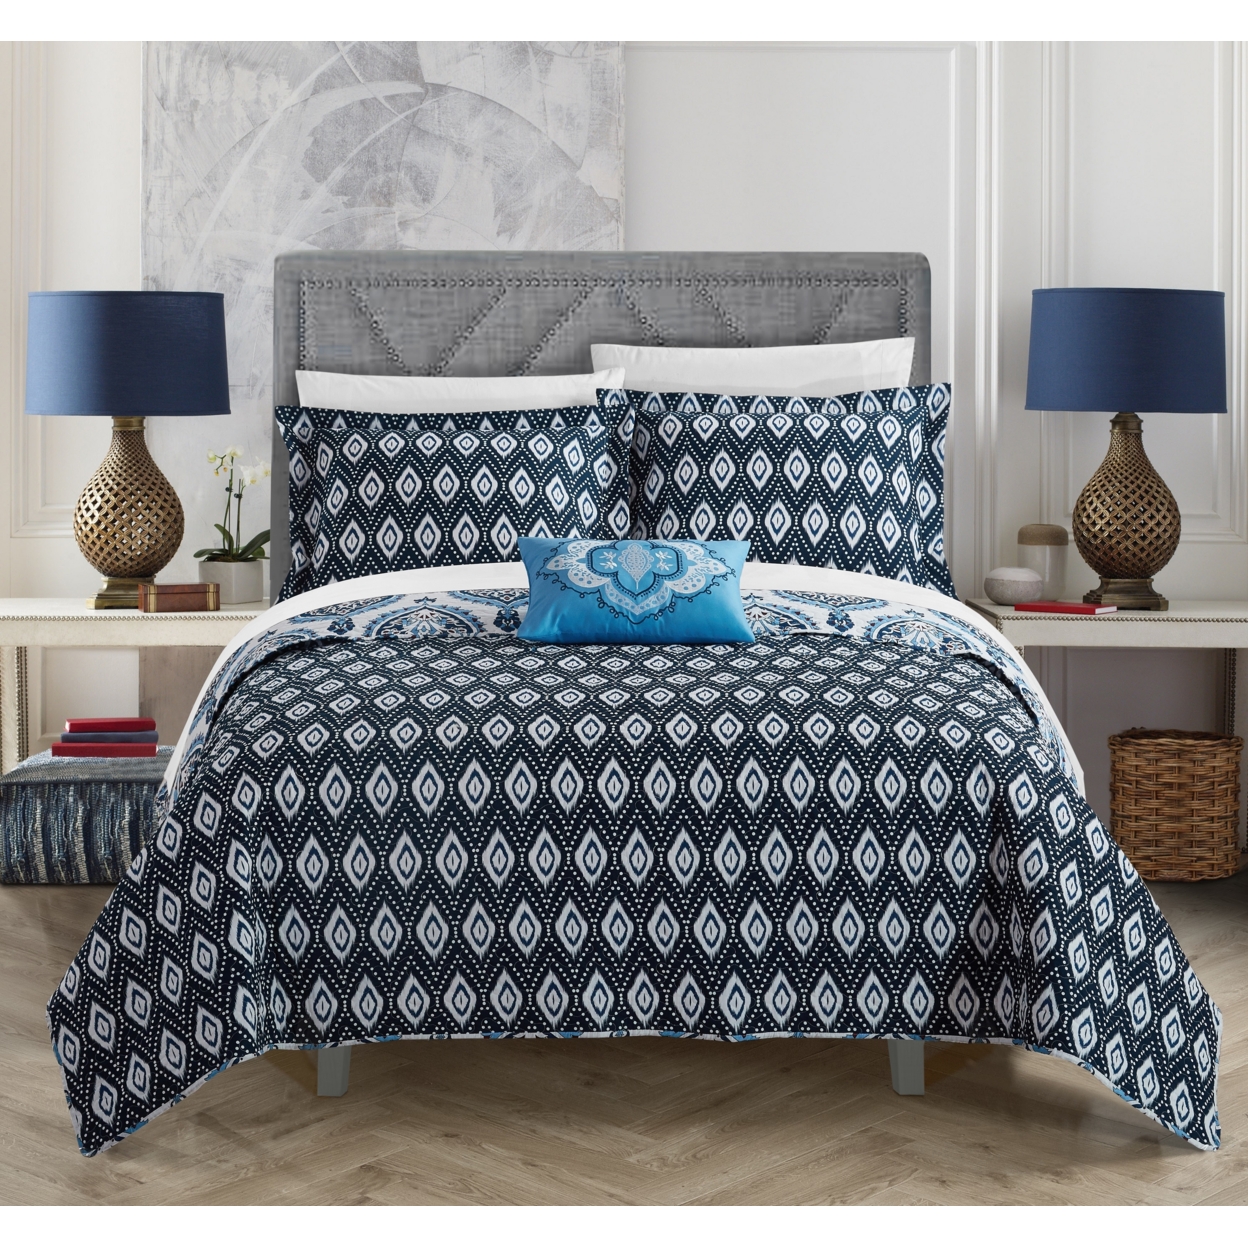 Chic Home 3/4 Piece Breda 100% Cotton 200 Thread Count Medallion Inspired Printed REVERSIBLE Quilt Set with Shams and